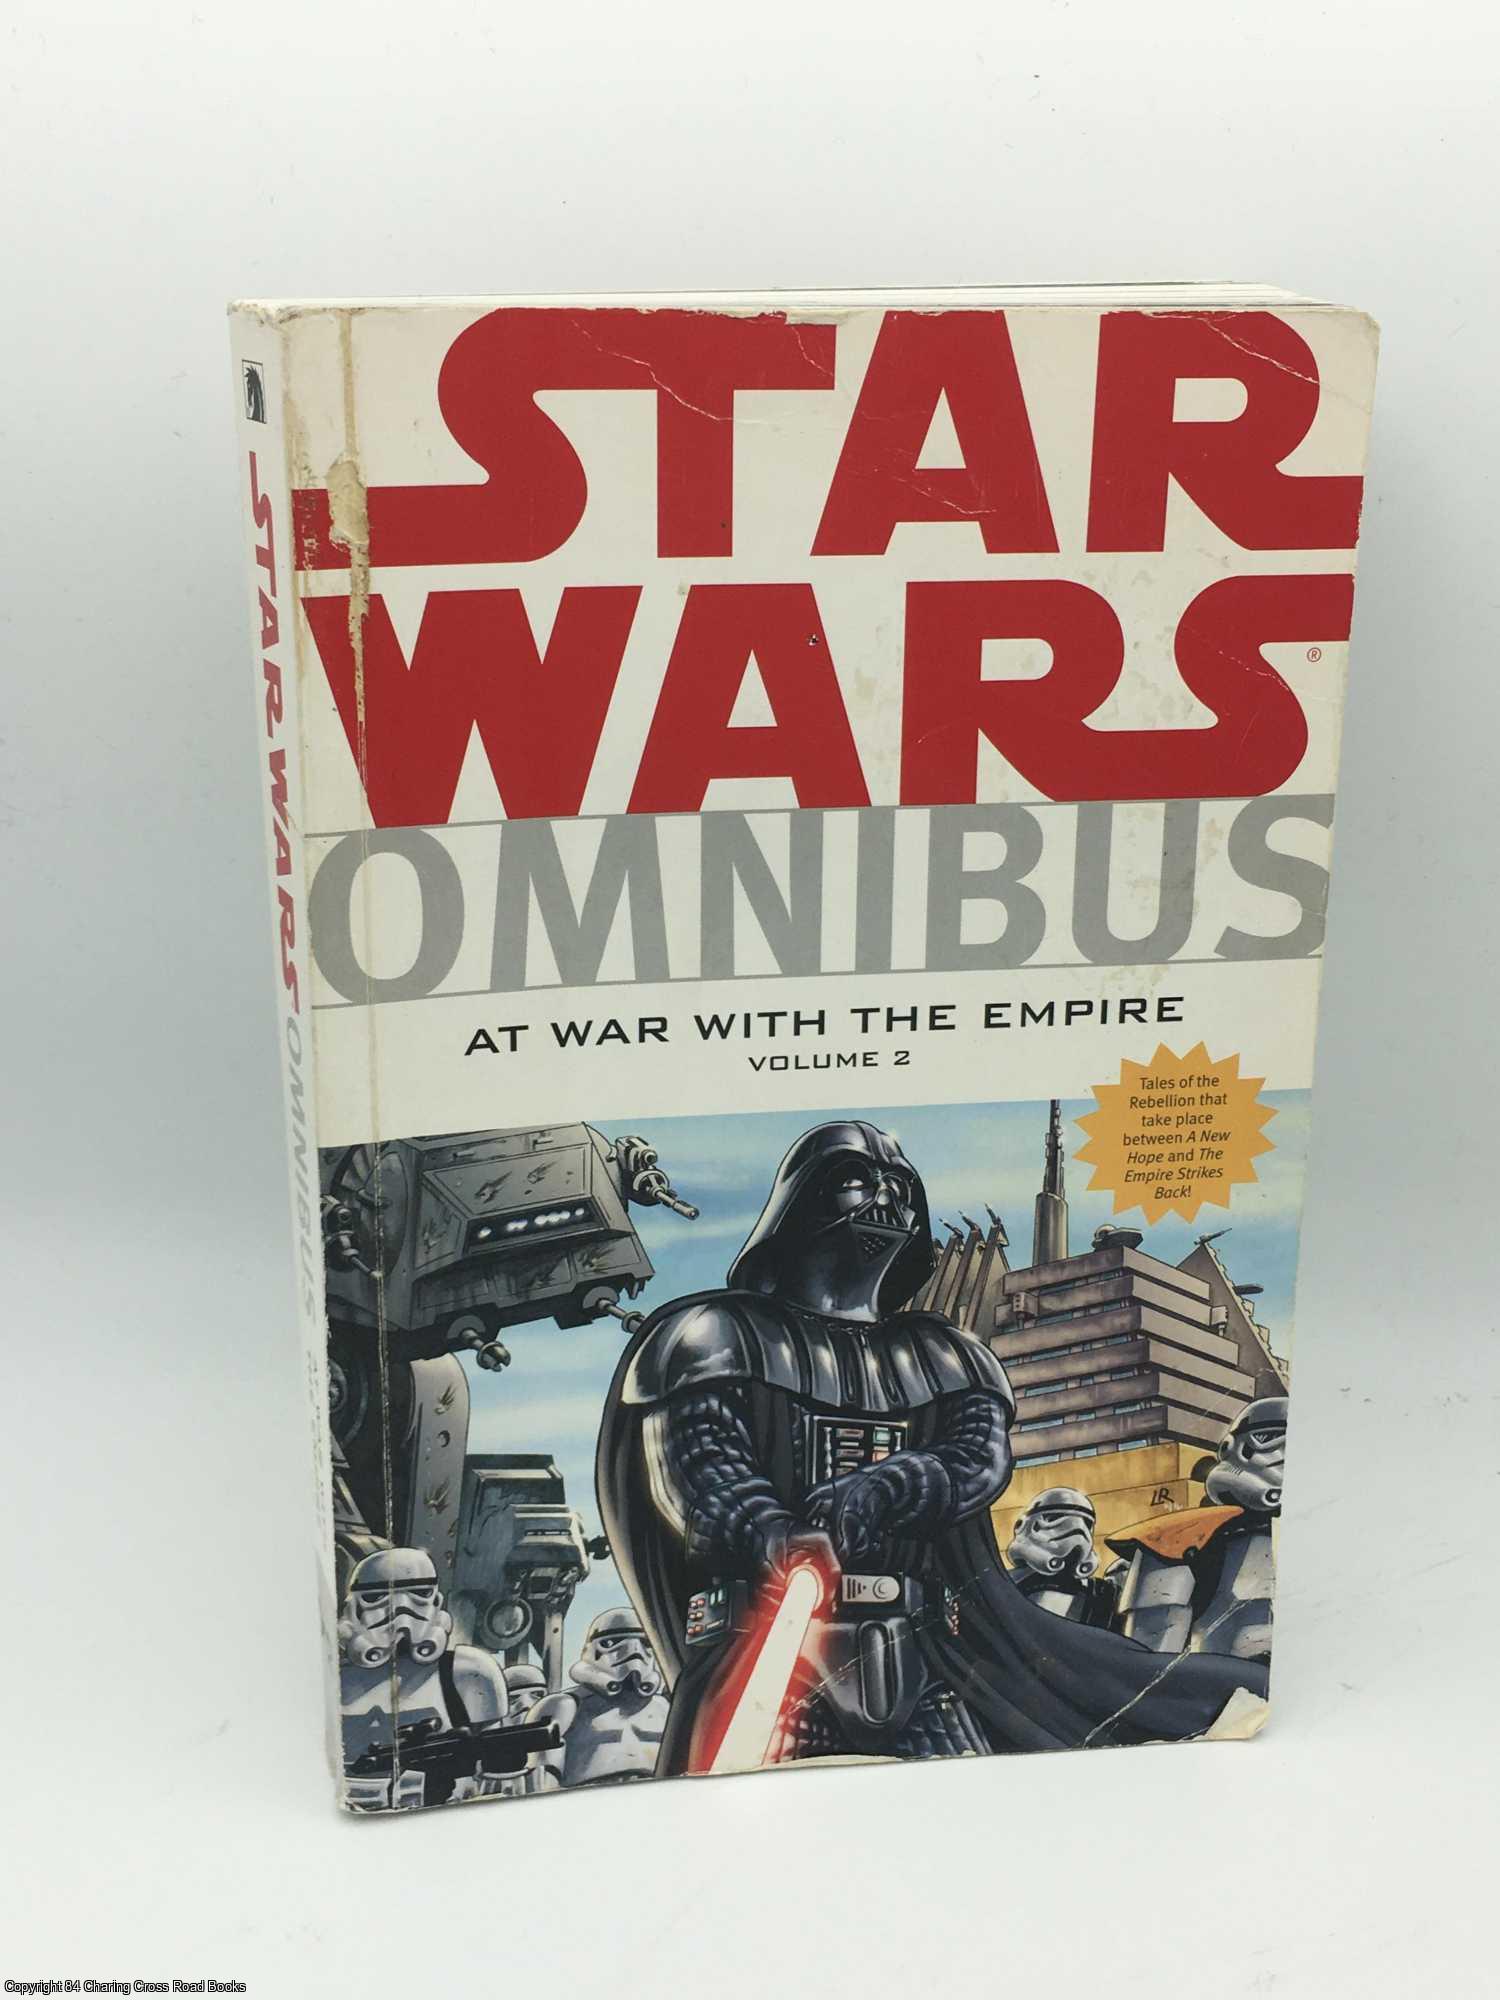 Andrews, Thomas - Star Wars Omnibus: At War with the Empire Volume 2